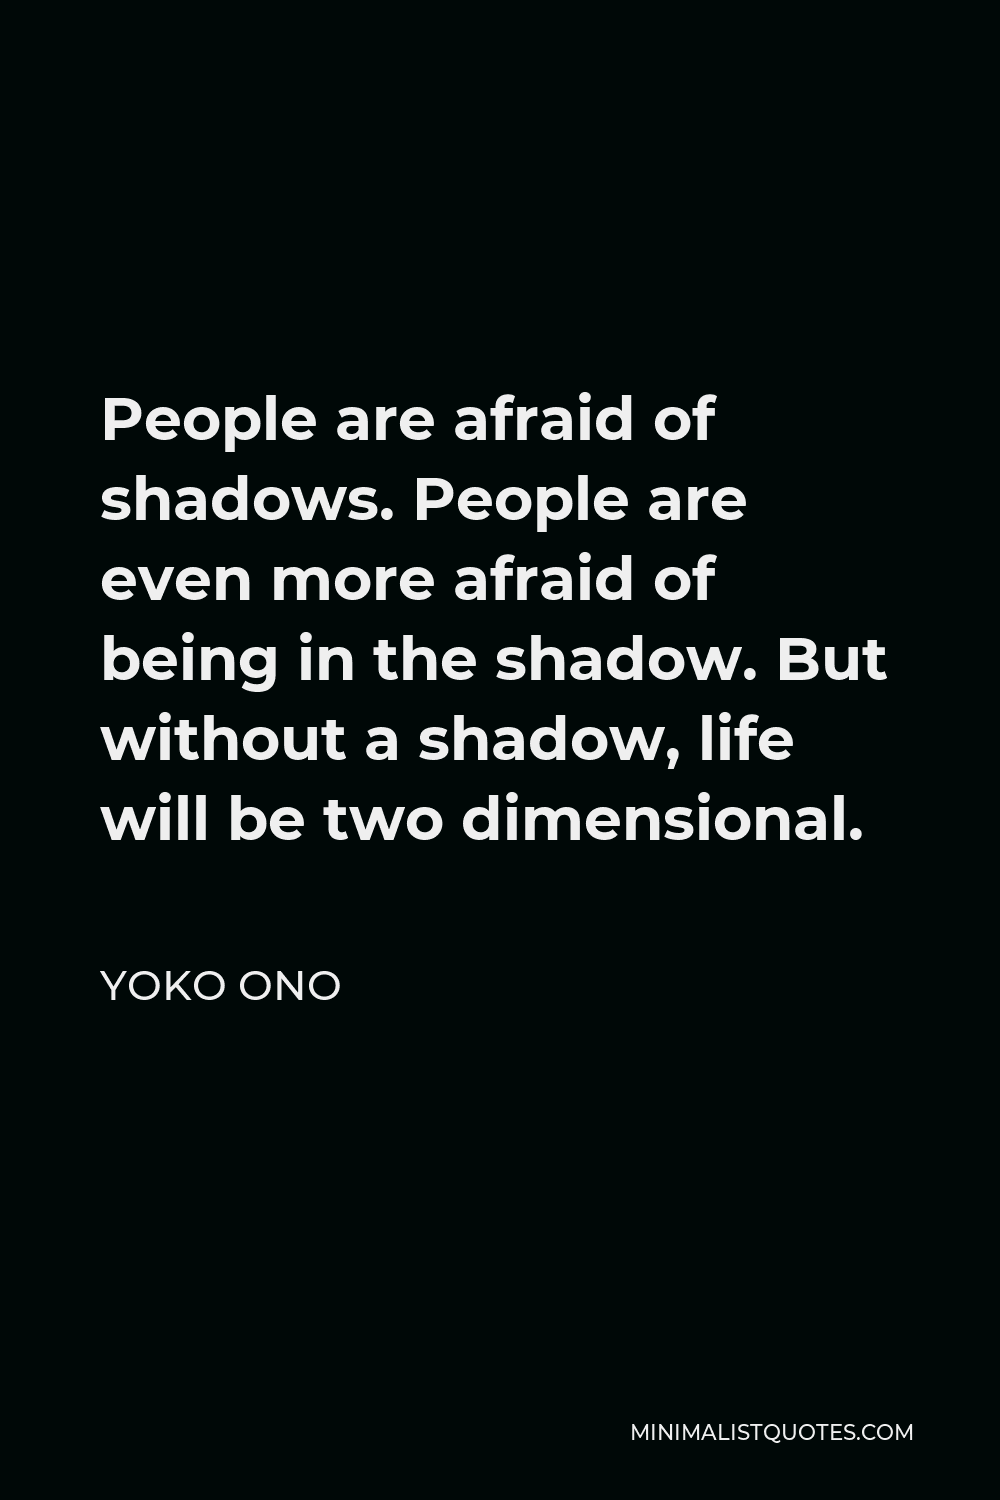 Yoko Ono Quote - People are afraid of shadows. People are even more afraid of being in the shadow. But without a shadow, life will be two dimensional.